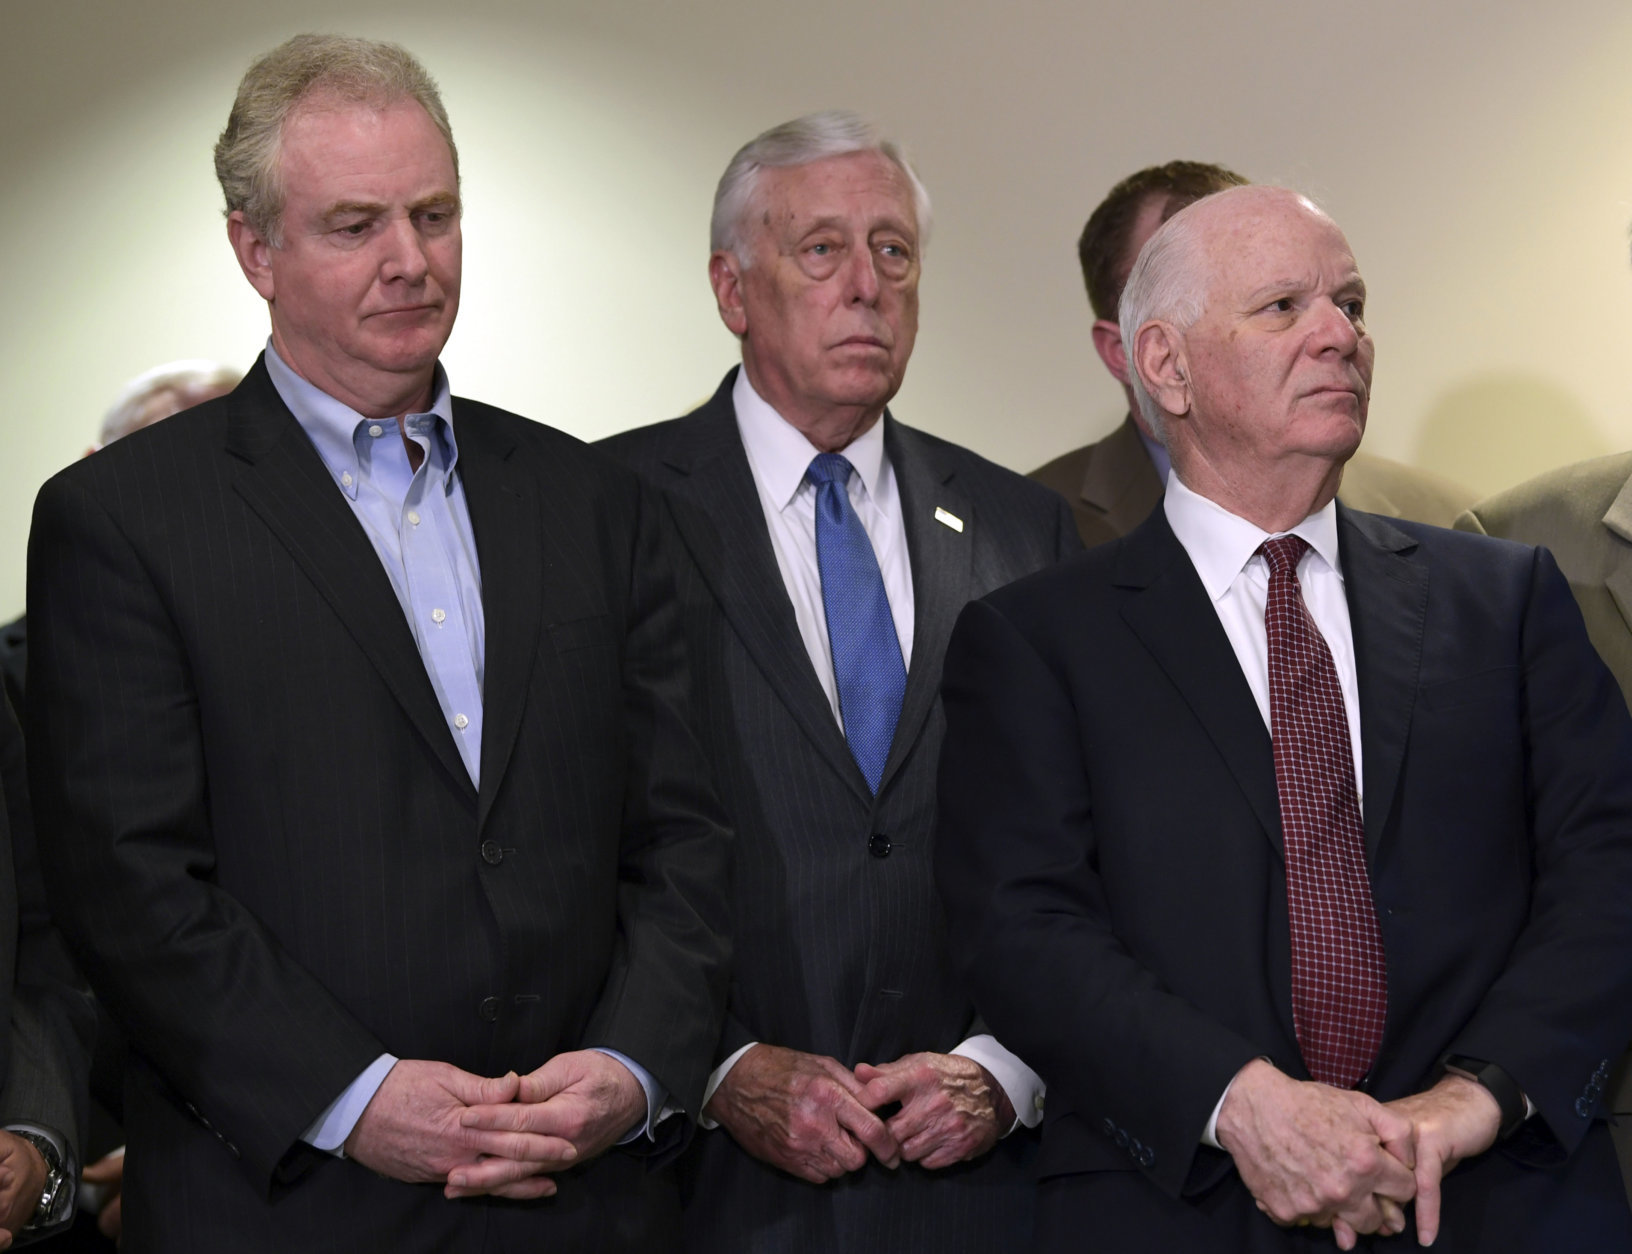 Sen. Chris Van Hollen, D-Md., left, House Minority Whip Steny Hoyer, D-Md., center, and Sen. Ben Cardin, D-Md., right, listen during a news conference about the shooting at Great Mills High School in Great Mills, Md., Tuesday, March 20, 2018. (AP Photo/Susan Walsh)